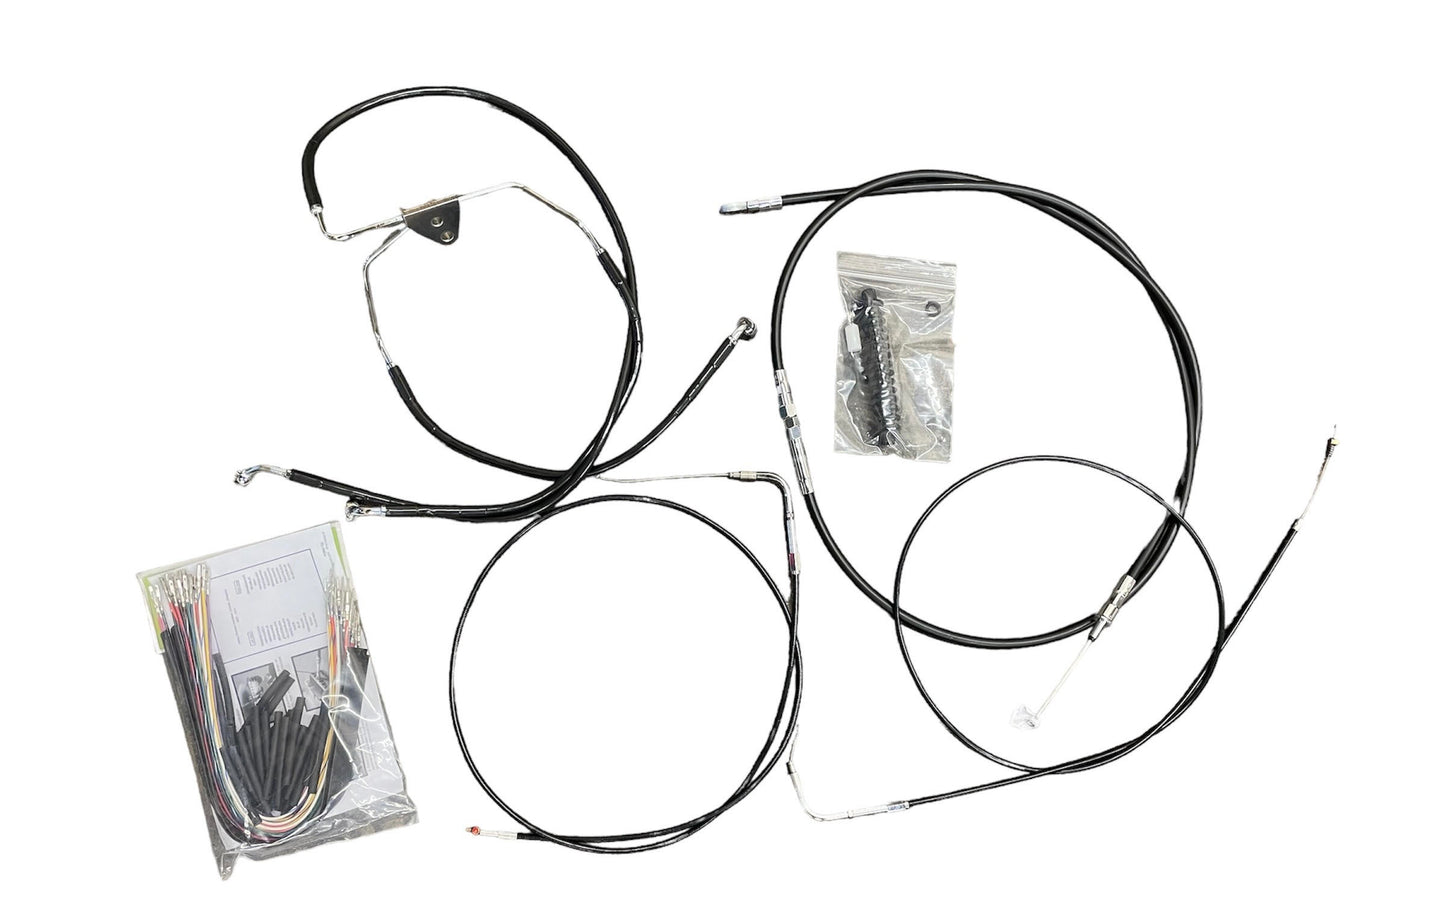 Road 6 Customs Cable kit & Wire Ext. for 96-07 Baggers with batwing fairings